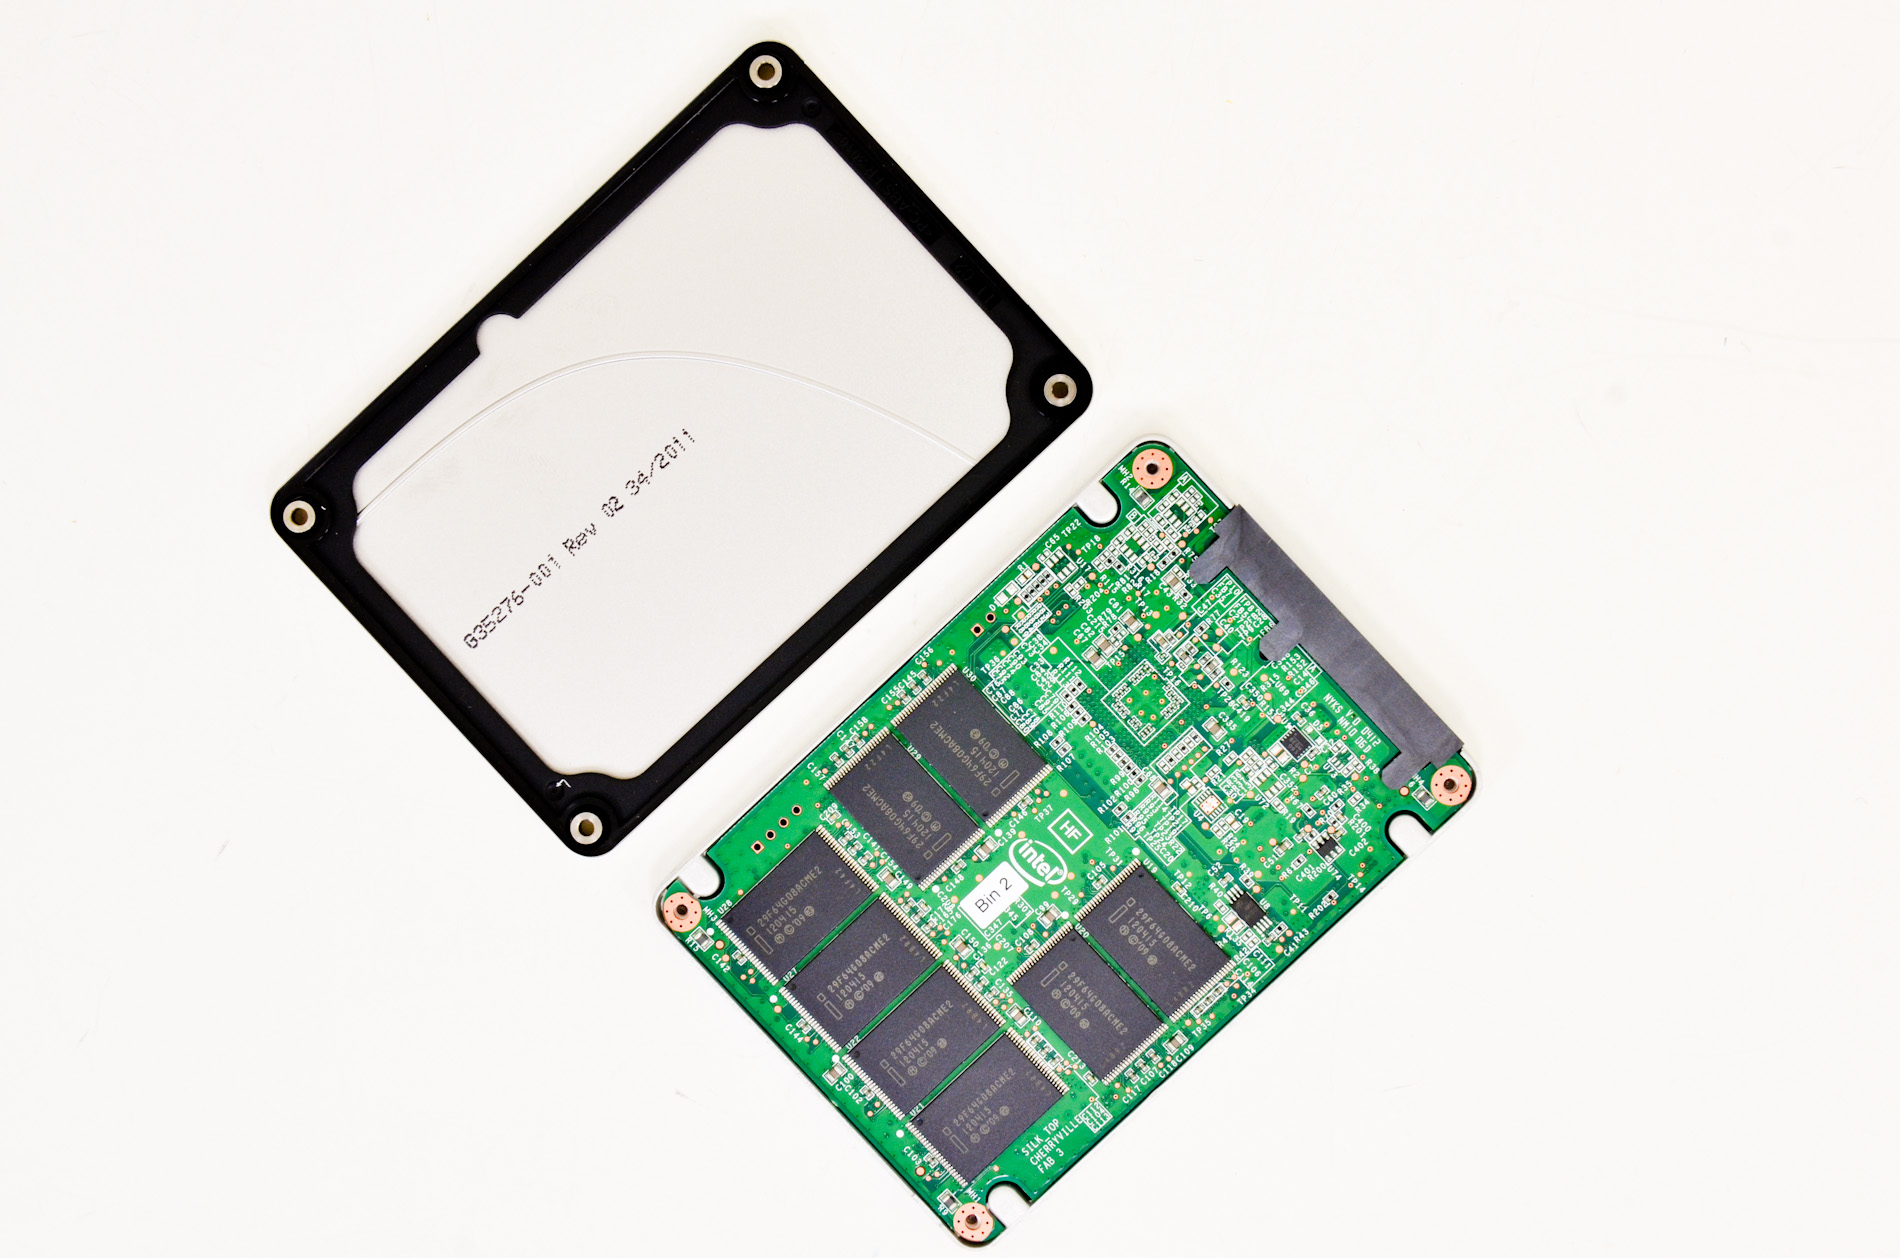 Final Words - The SSD 330 (60GB, 120GB,